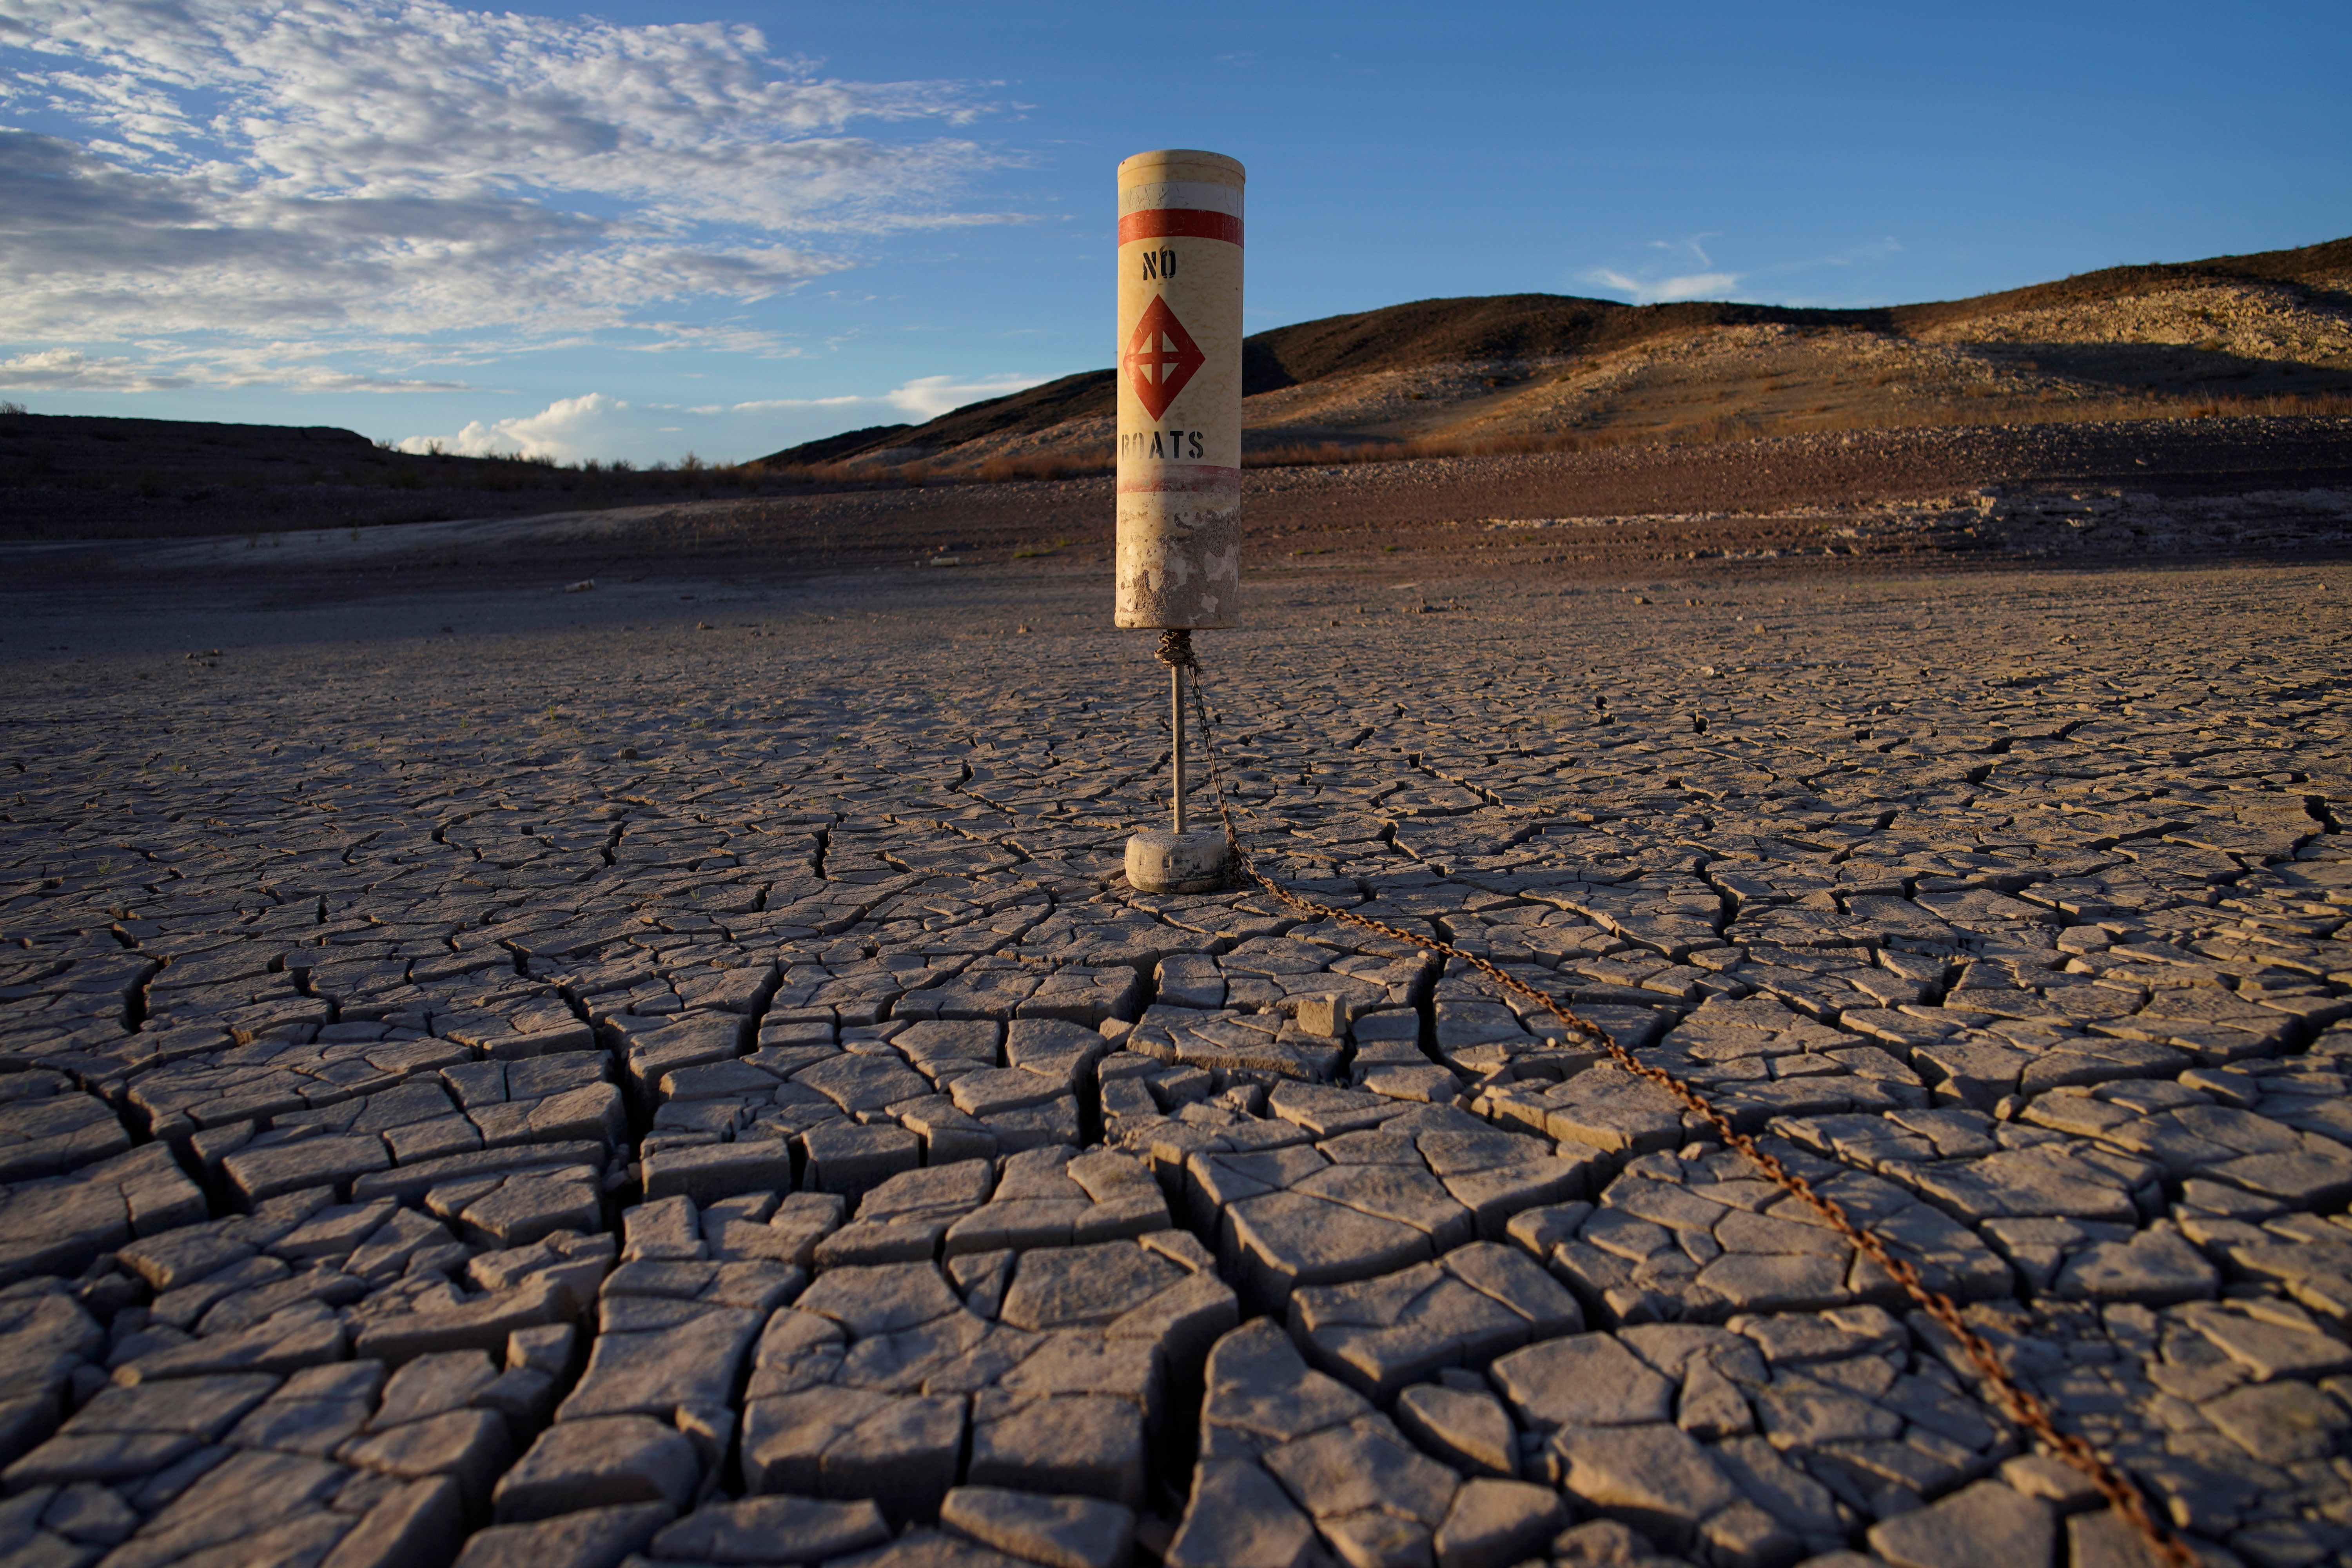 Government calls for water cuts for Arizona and Nevada amid drought, citing need for 'urgent action'